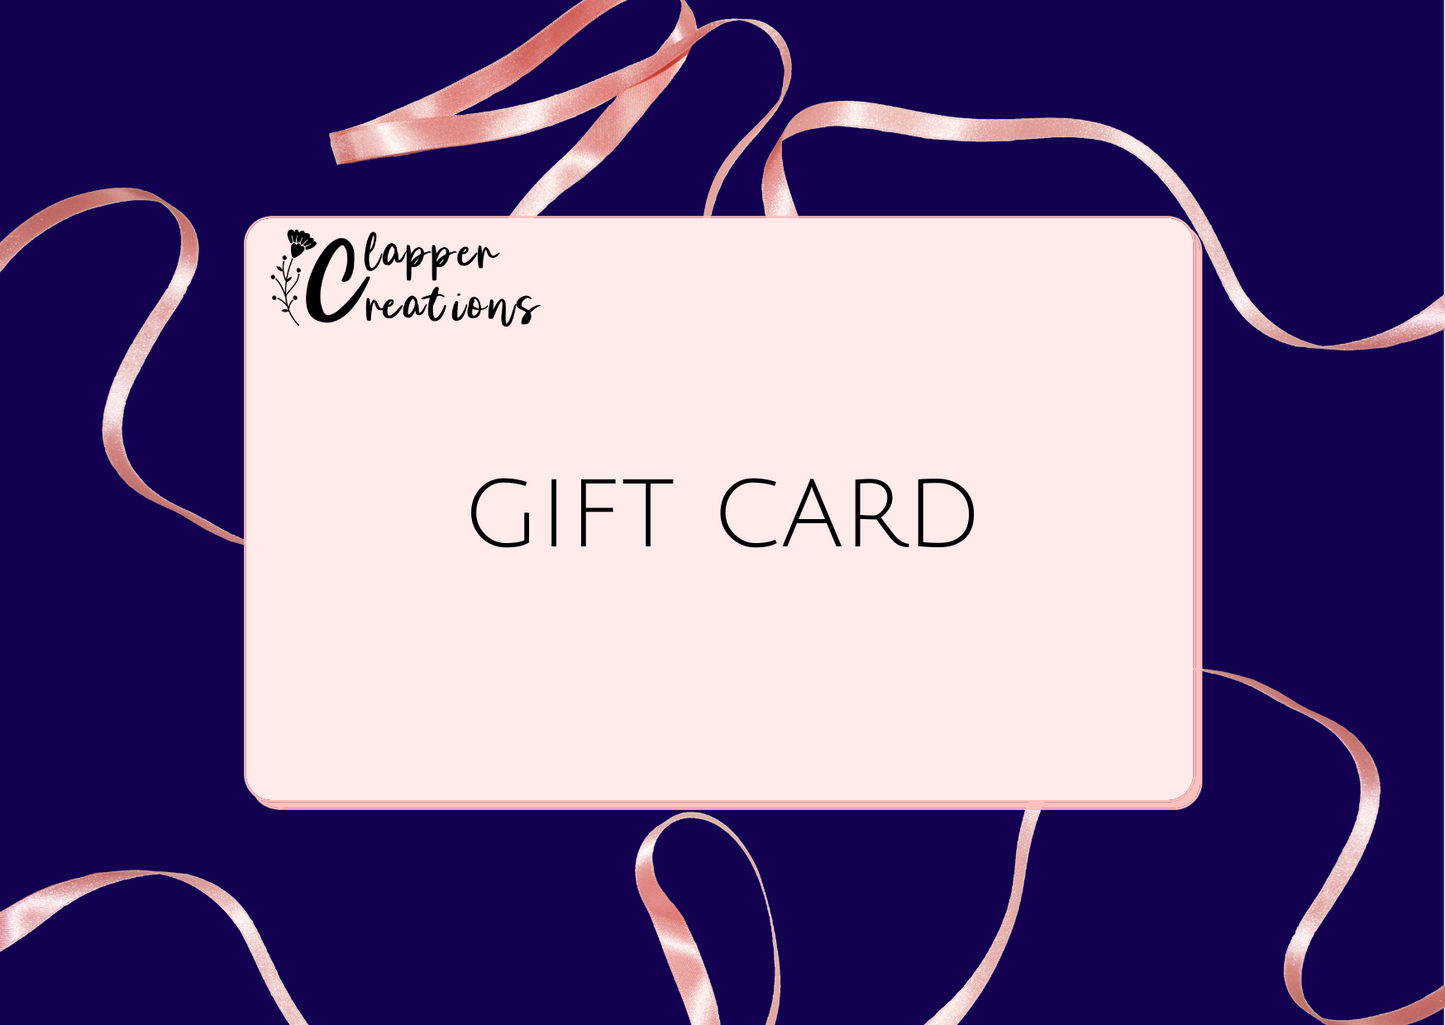 ClapperCreations Gift Card